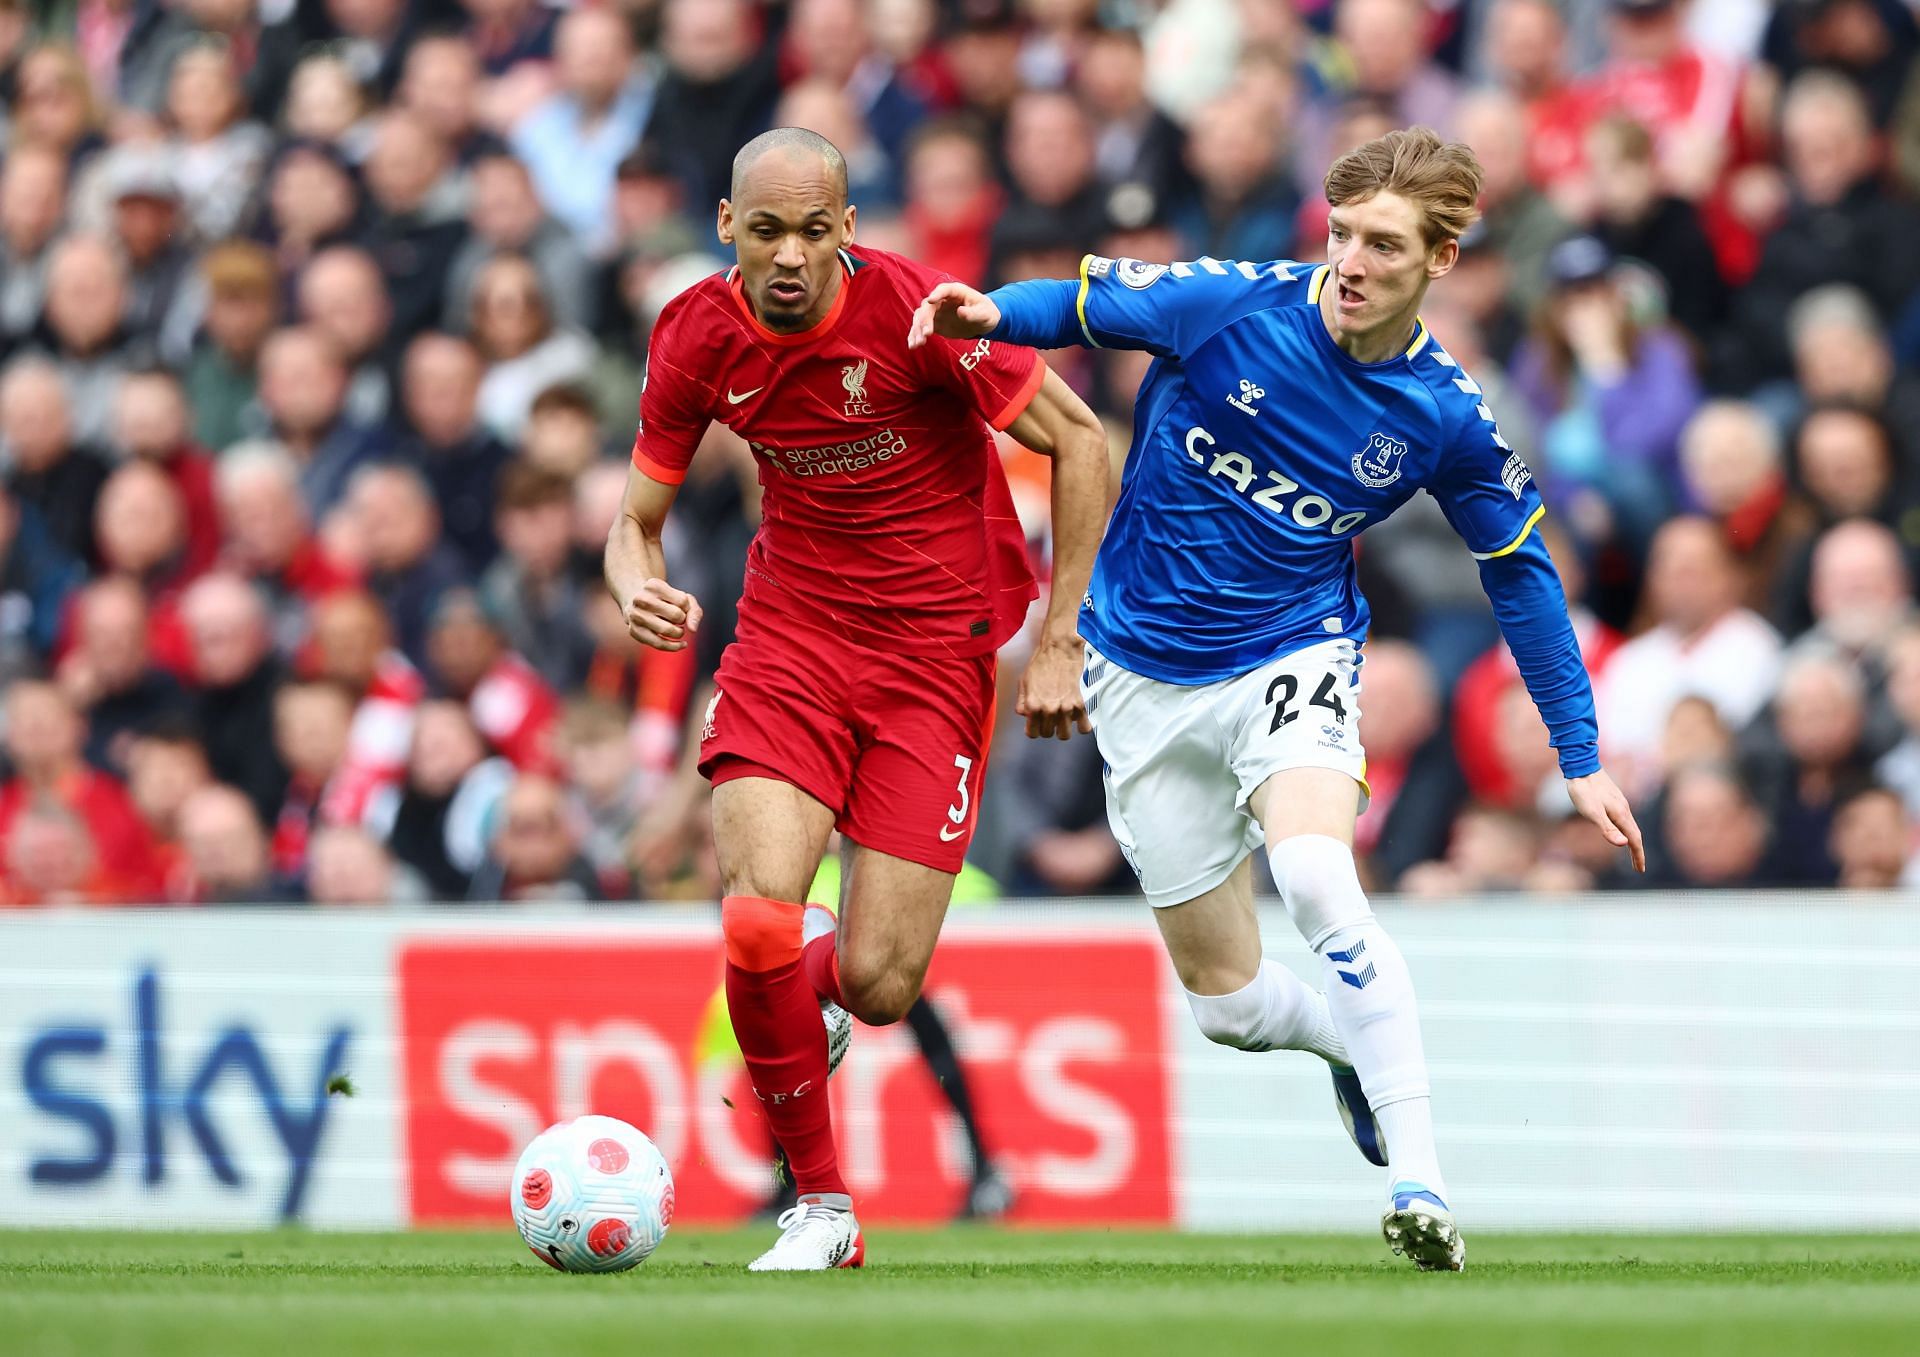 Fabinho has been a consistent performer for the Reds